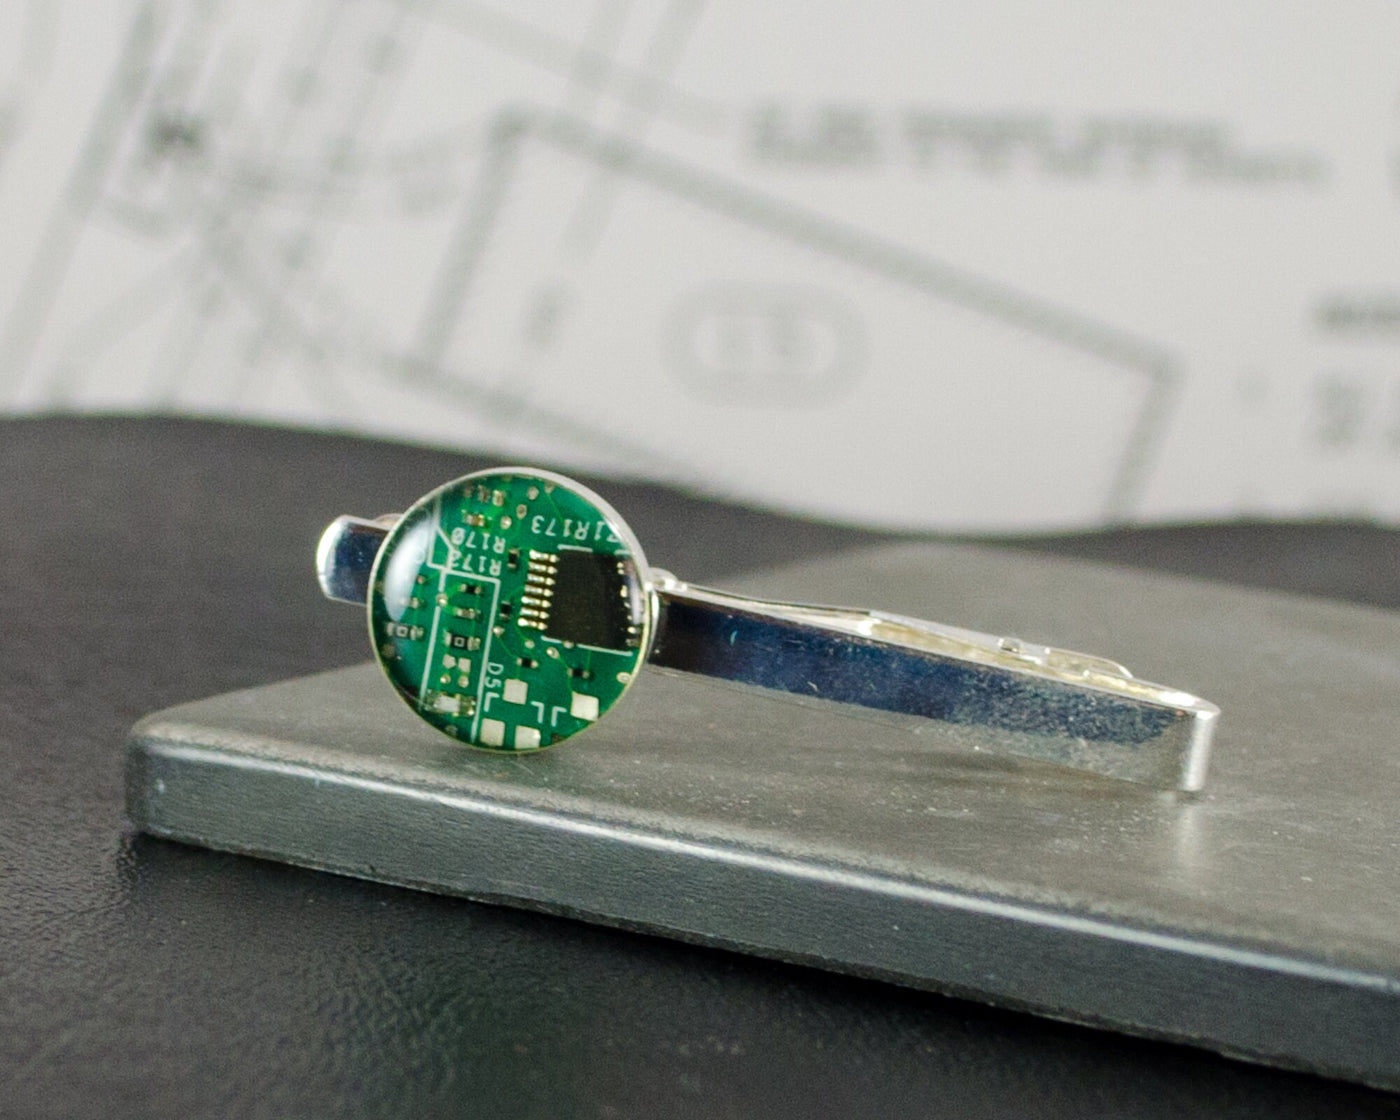 Green Circuit Board Tie Bar, Recycled Computer Tie Clip, Geeky Gift, Technology Jewelry, Gifts for Engineers, Mechanical Engineer, Upcycled